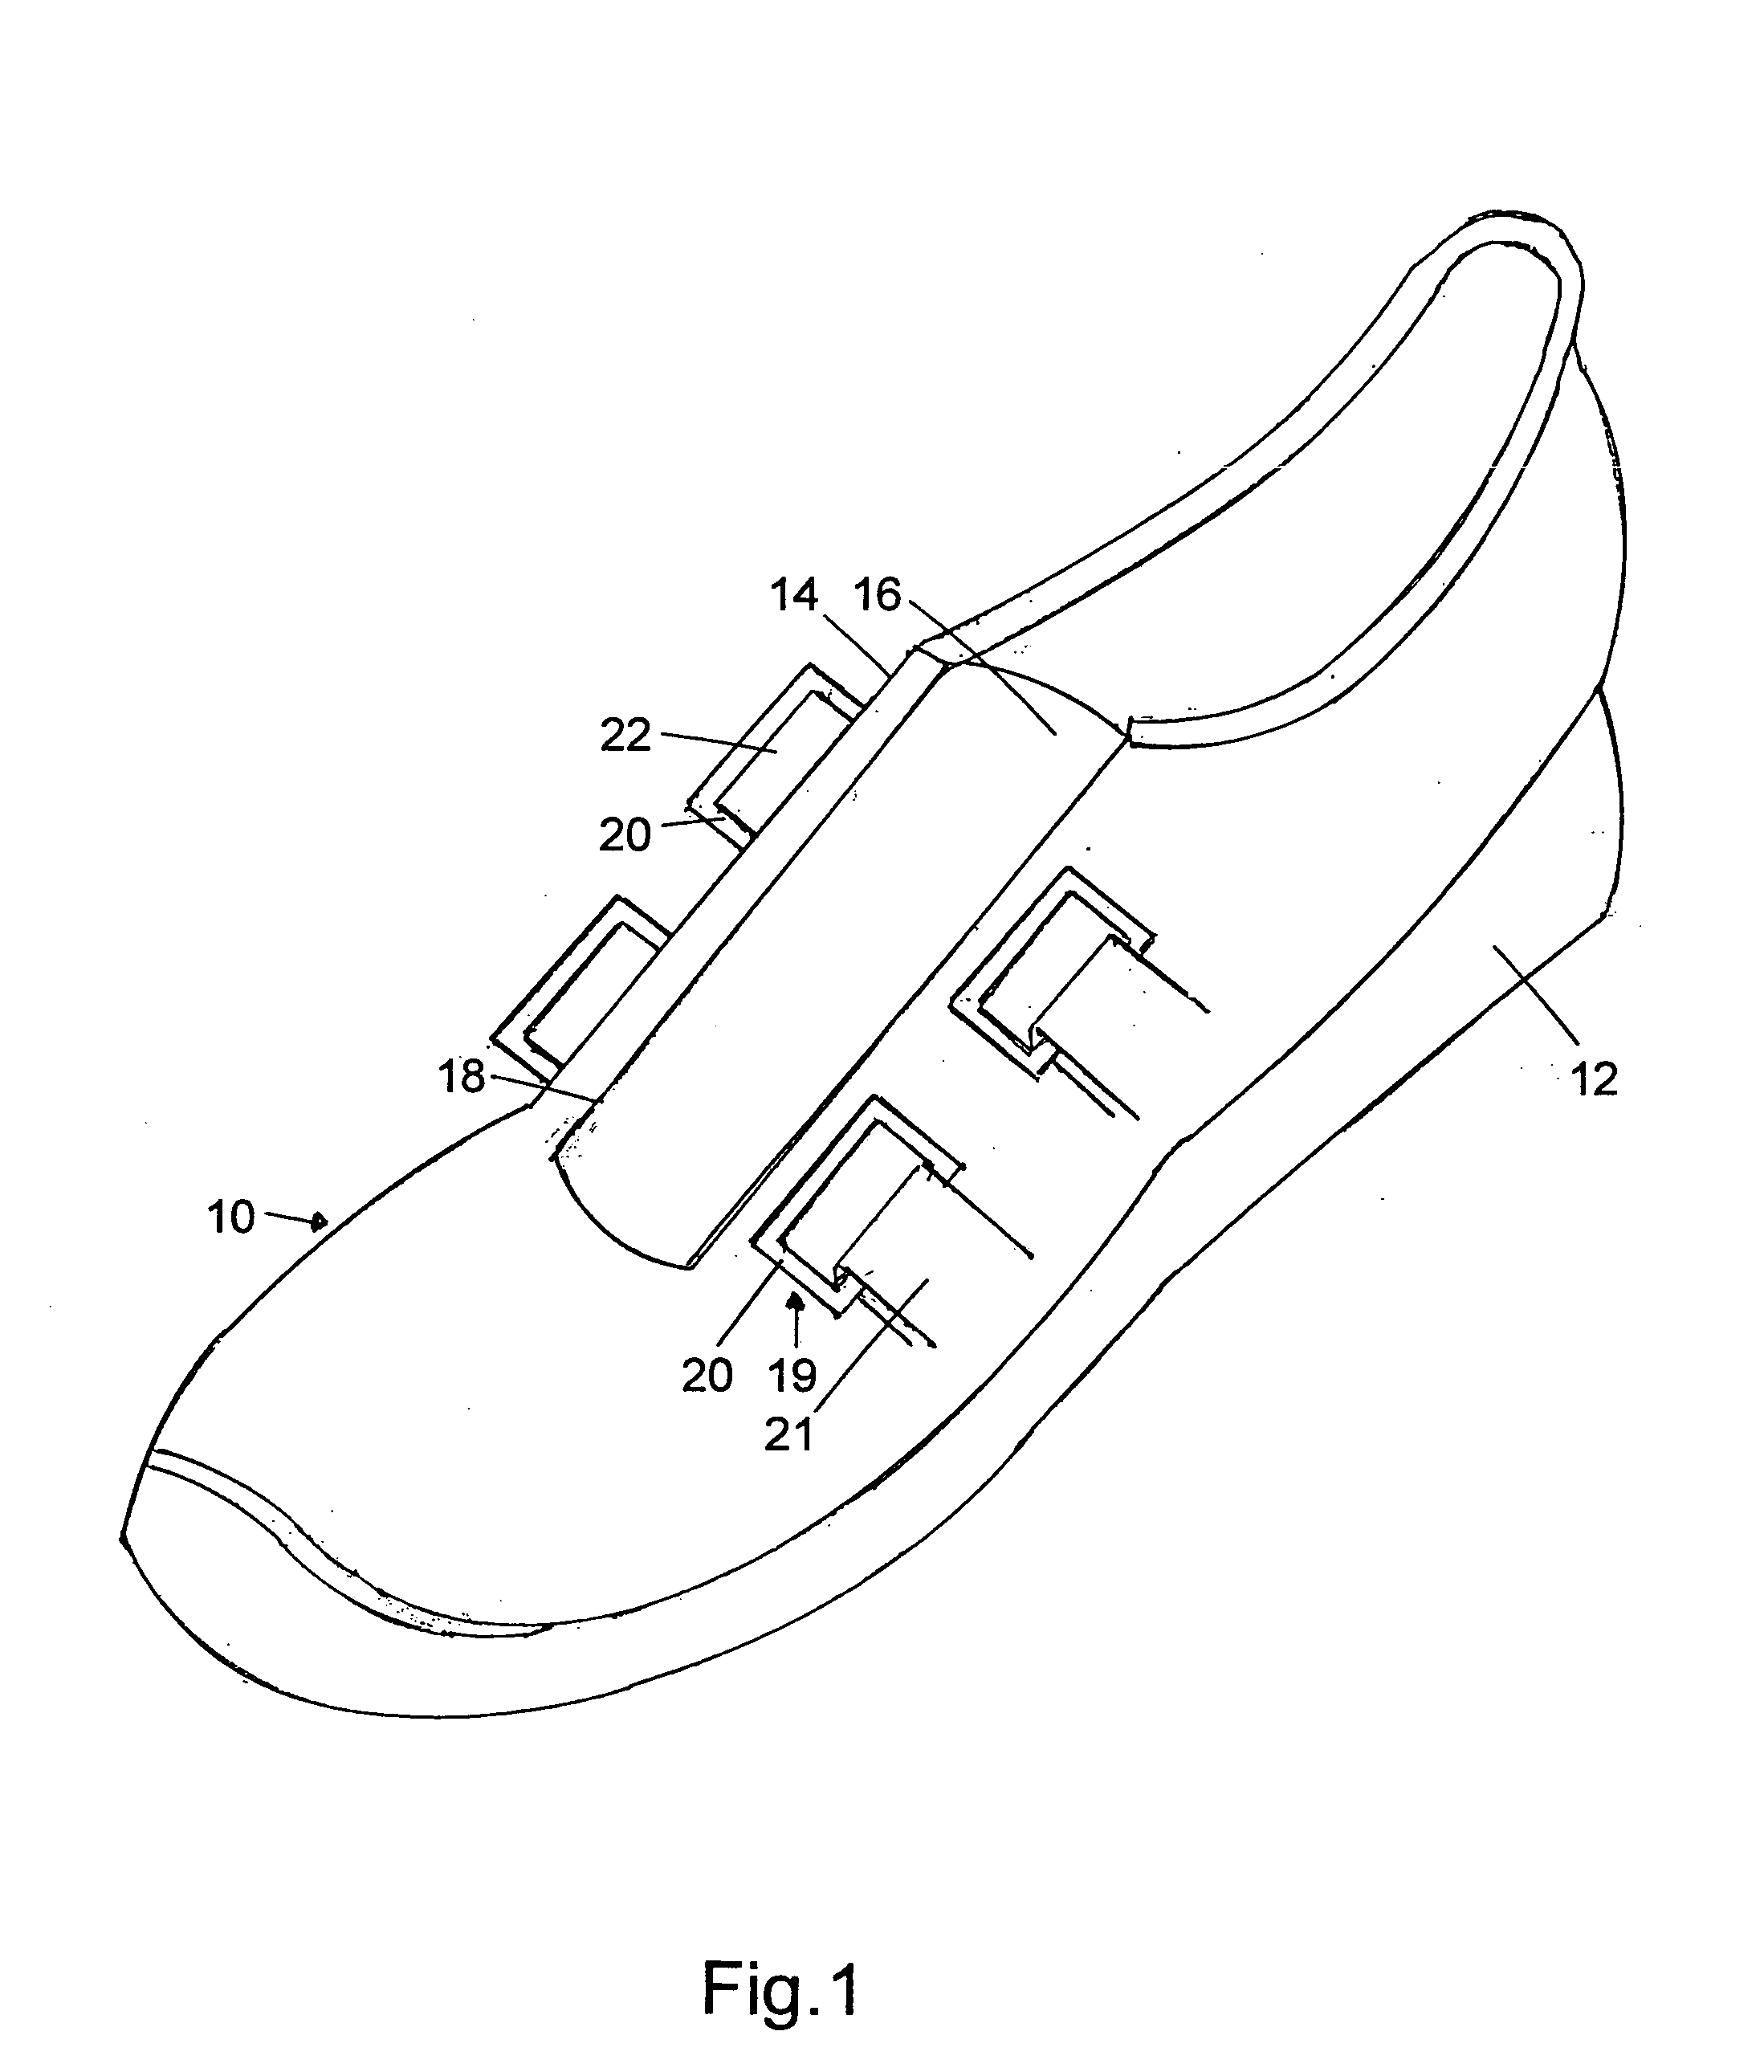 Footwear with removable closure straps